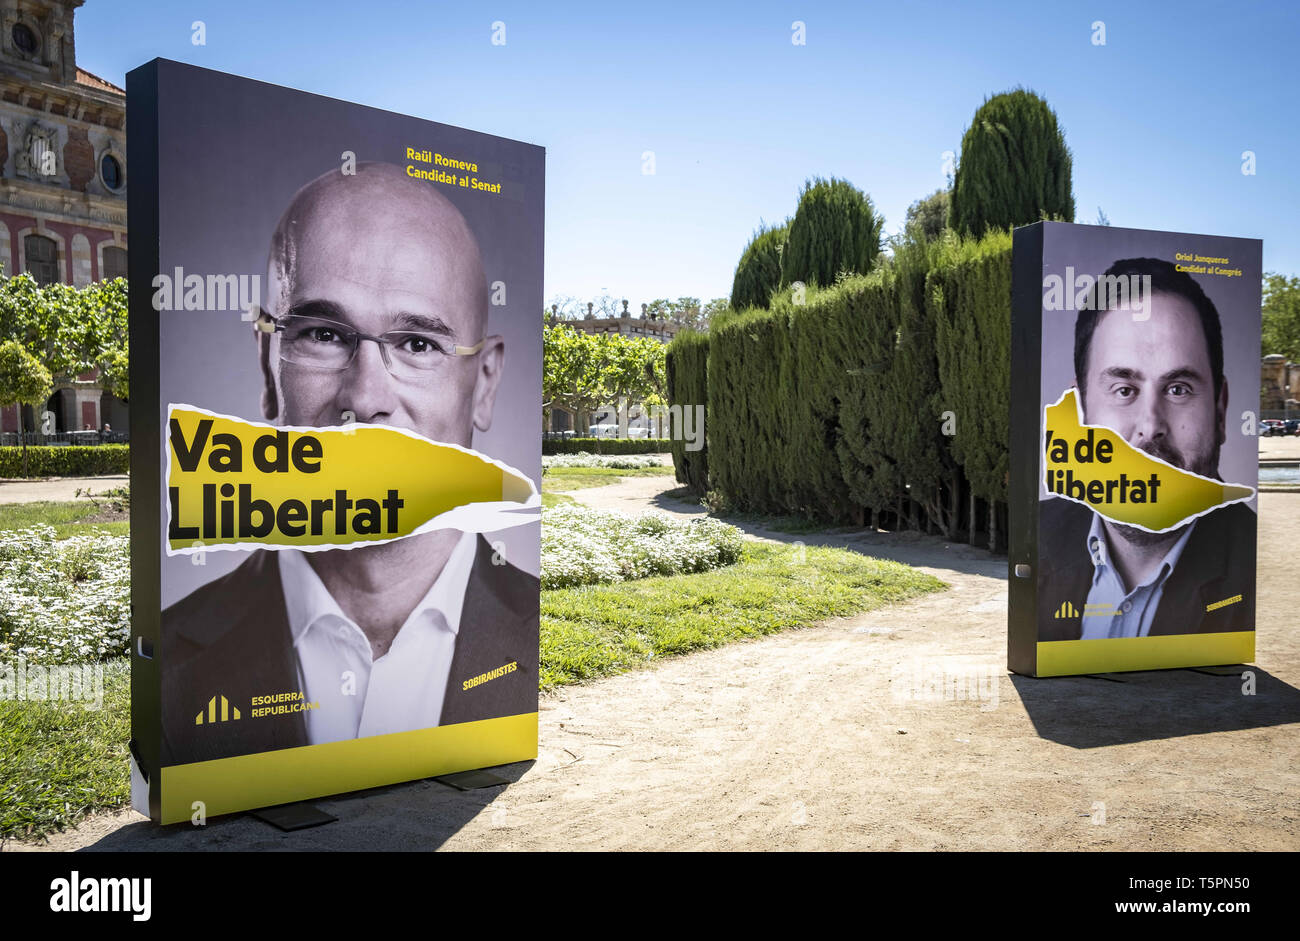 Barcelona, Catalonia, Spain. 26th Apr, 2019. Portraits of Raul Romeva and Oriol Junqueras both politicians in prison seen during the electoral campaign.The political formation Esquerra Republicana (ERC) reaffirms its candidacy on the last day of the electoral campaign. The Spaniards are summoned to the polls on April 28, where the most voted party will allow its leader to form a government. Credit: ZUMA Press, Inc./Alamy Live News Stock Photo